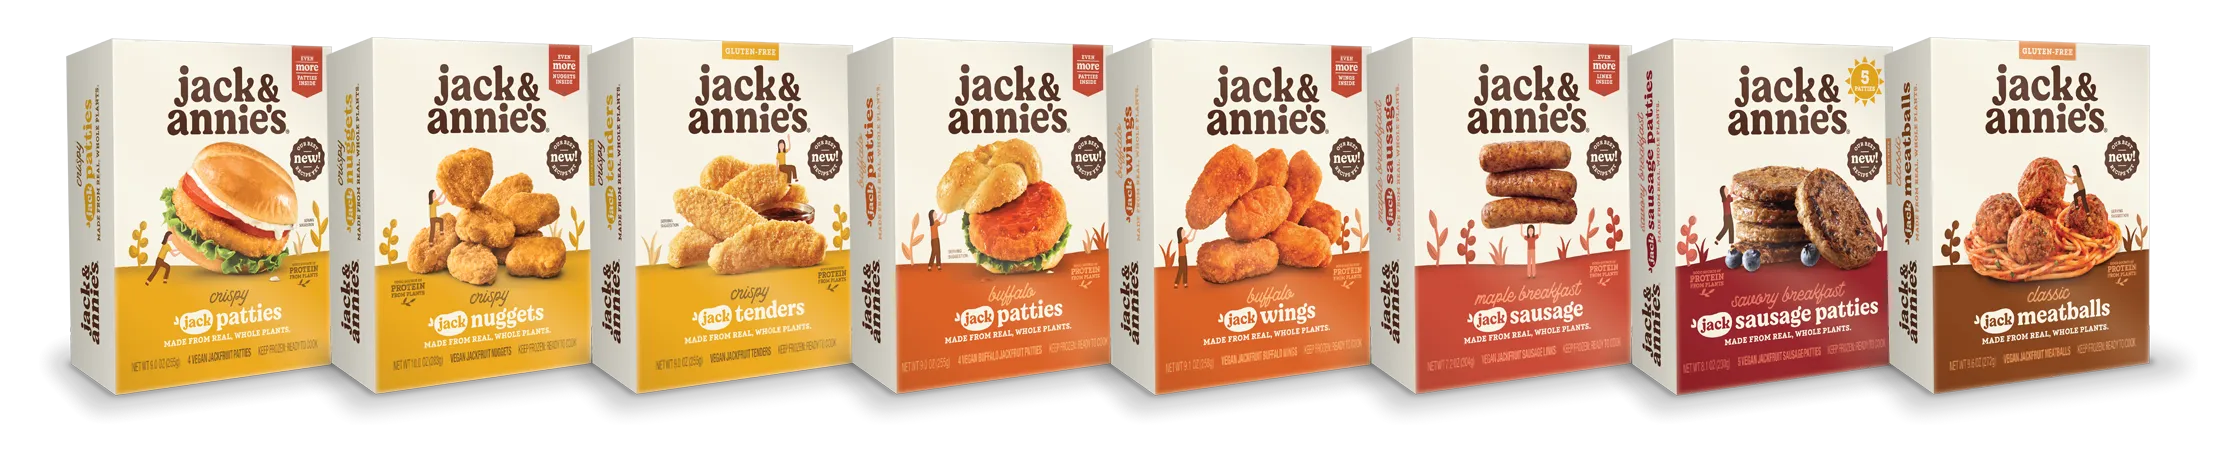 jack & annie's product lineup